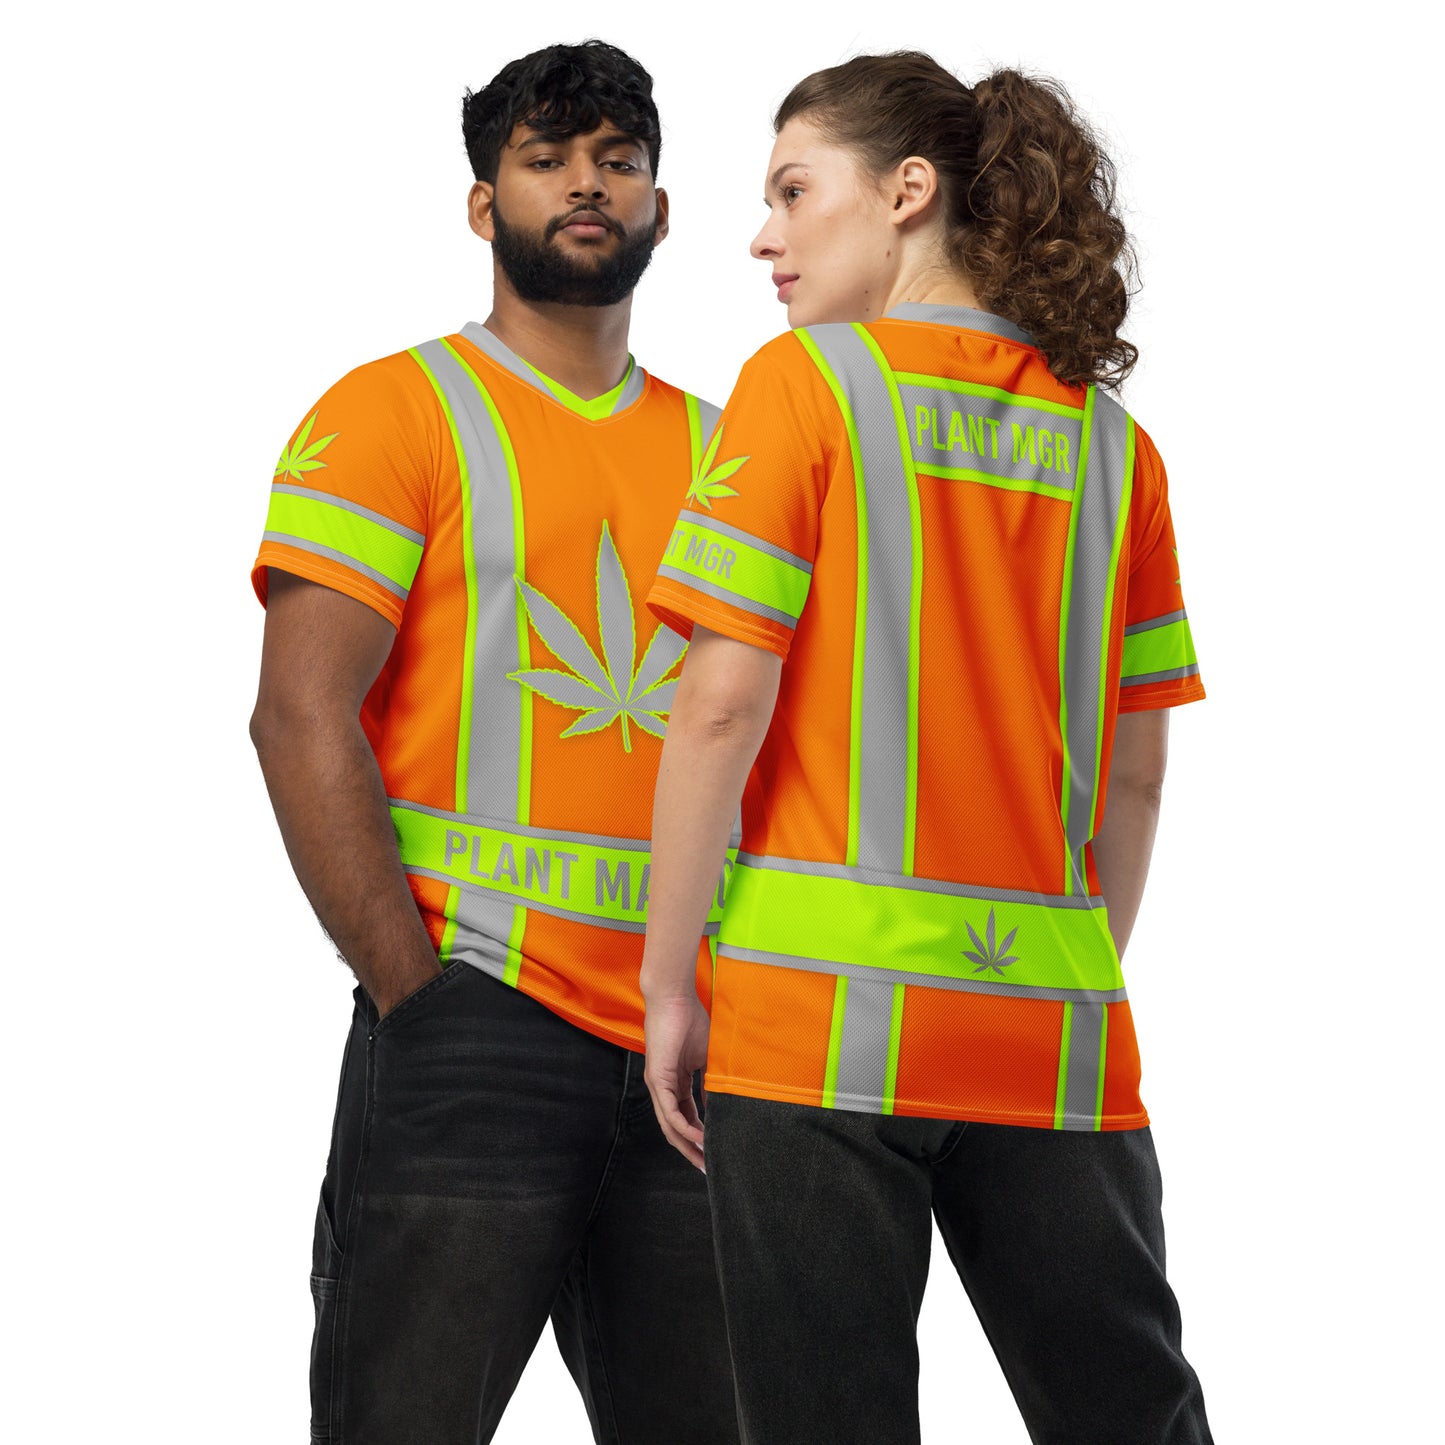 Plant Manager Safety Shirt - Recycled Unisex Sports Jersey